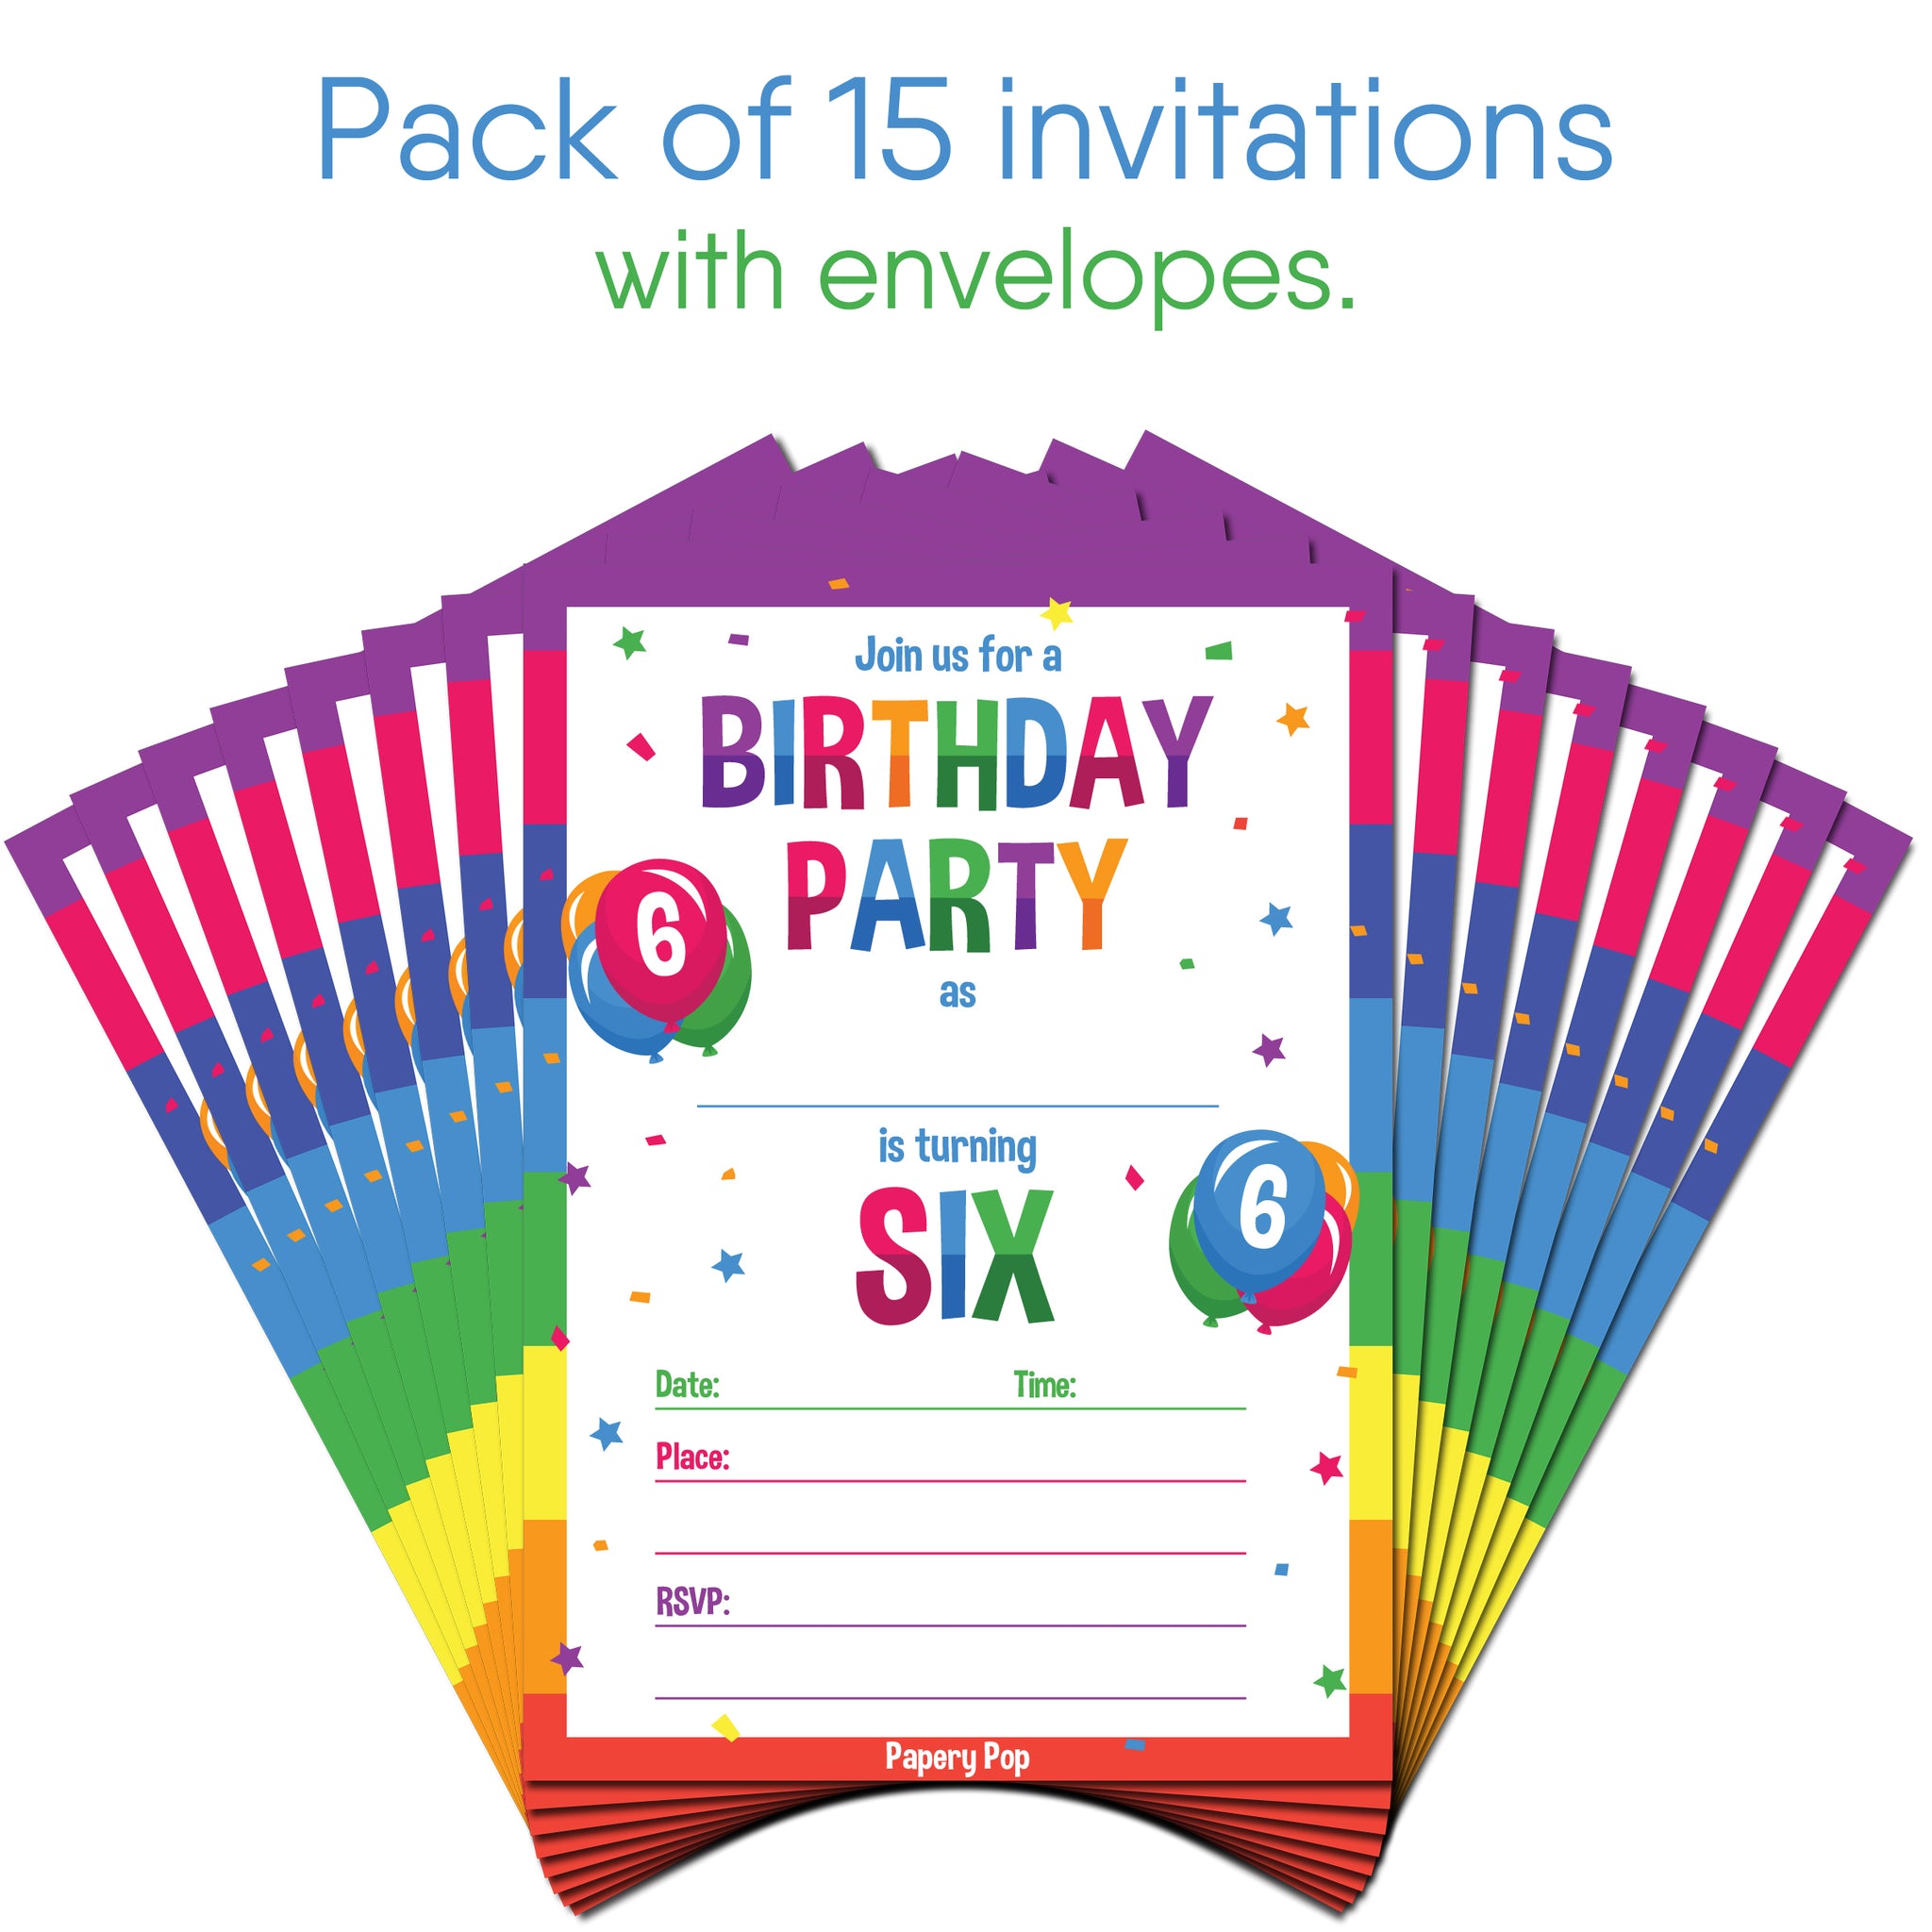 6-year-old-birthday-party-invitations-with-envelopes-15-count-kids